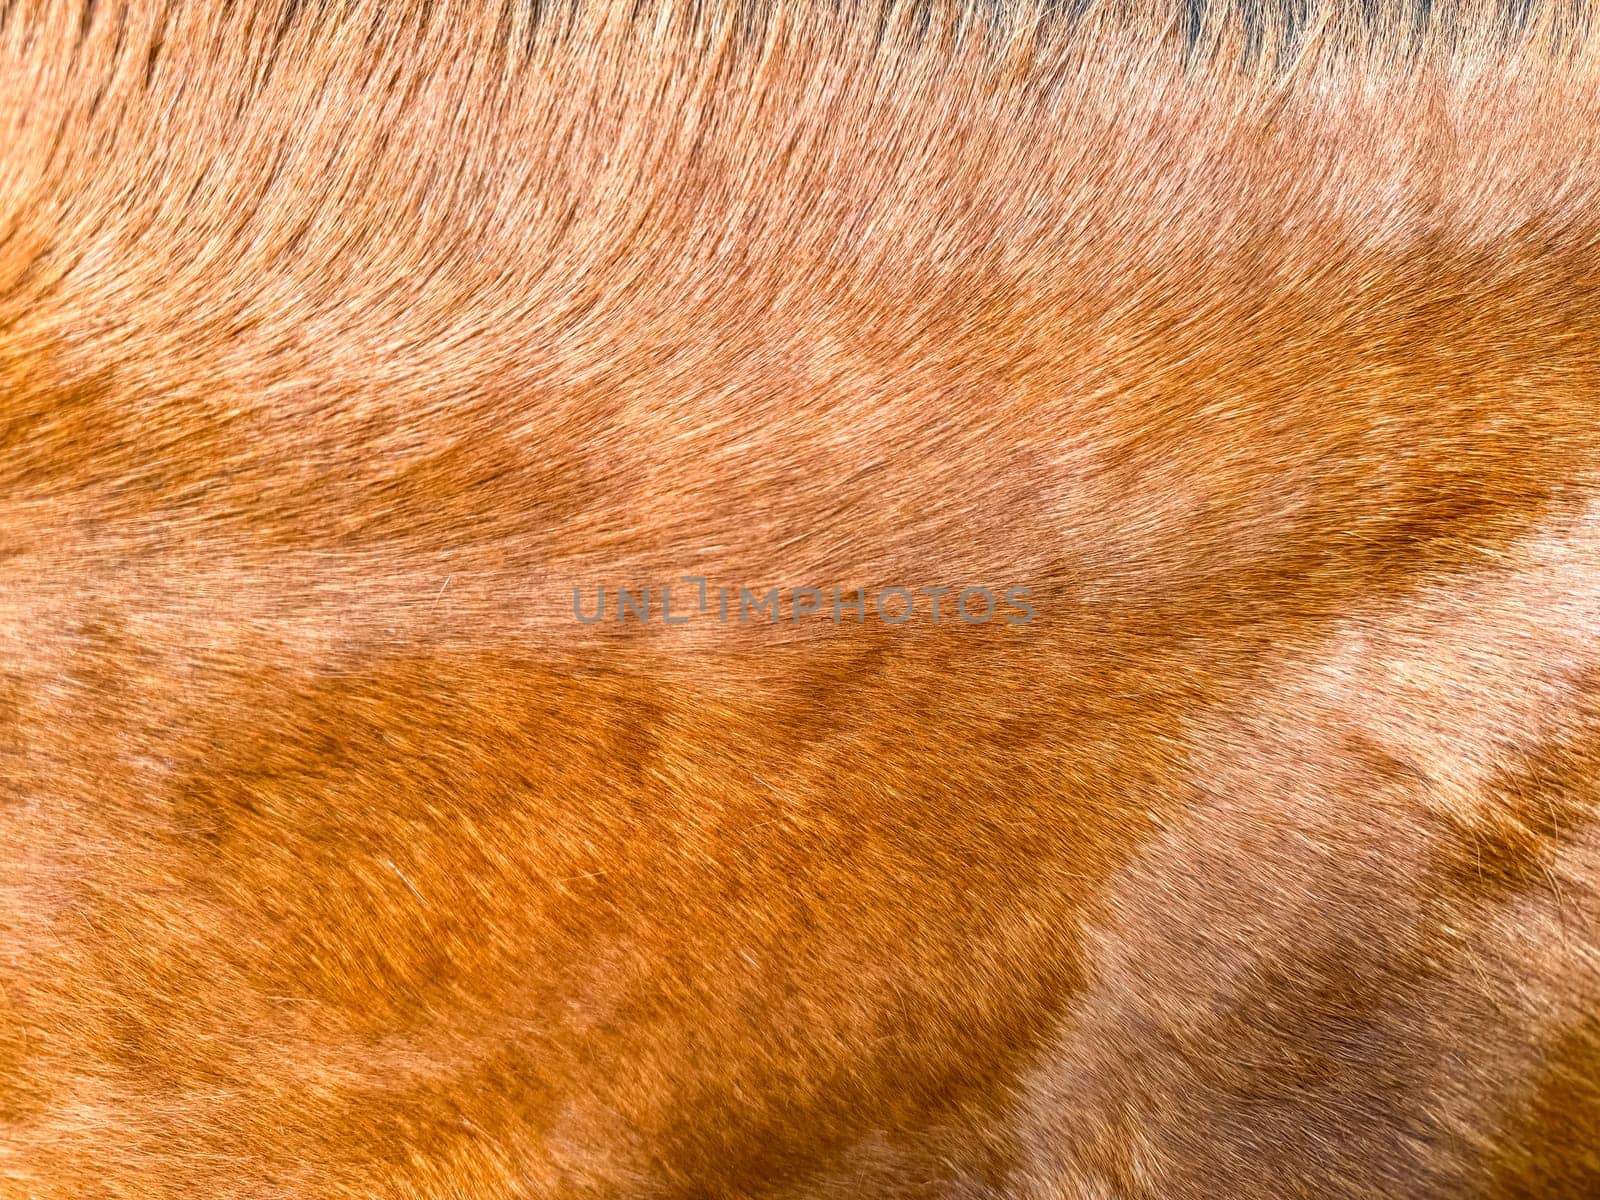 Close up of horse fur texture in brown and red color for background and design concepts in wildlife and nature theme. High quality photo